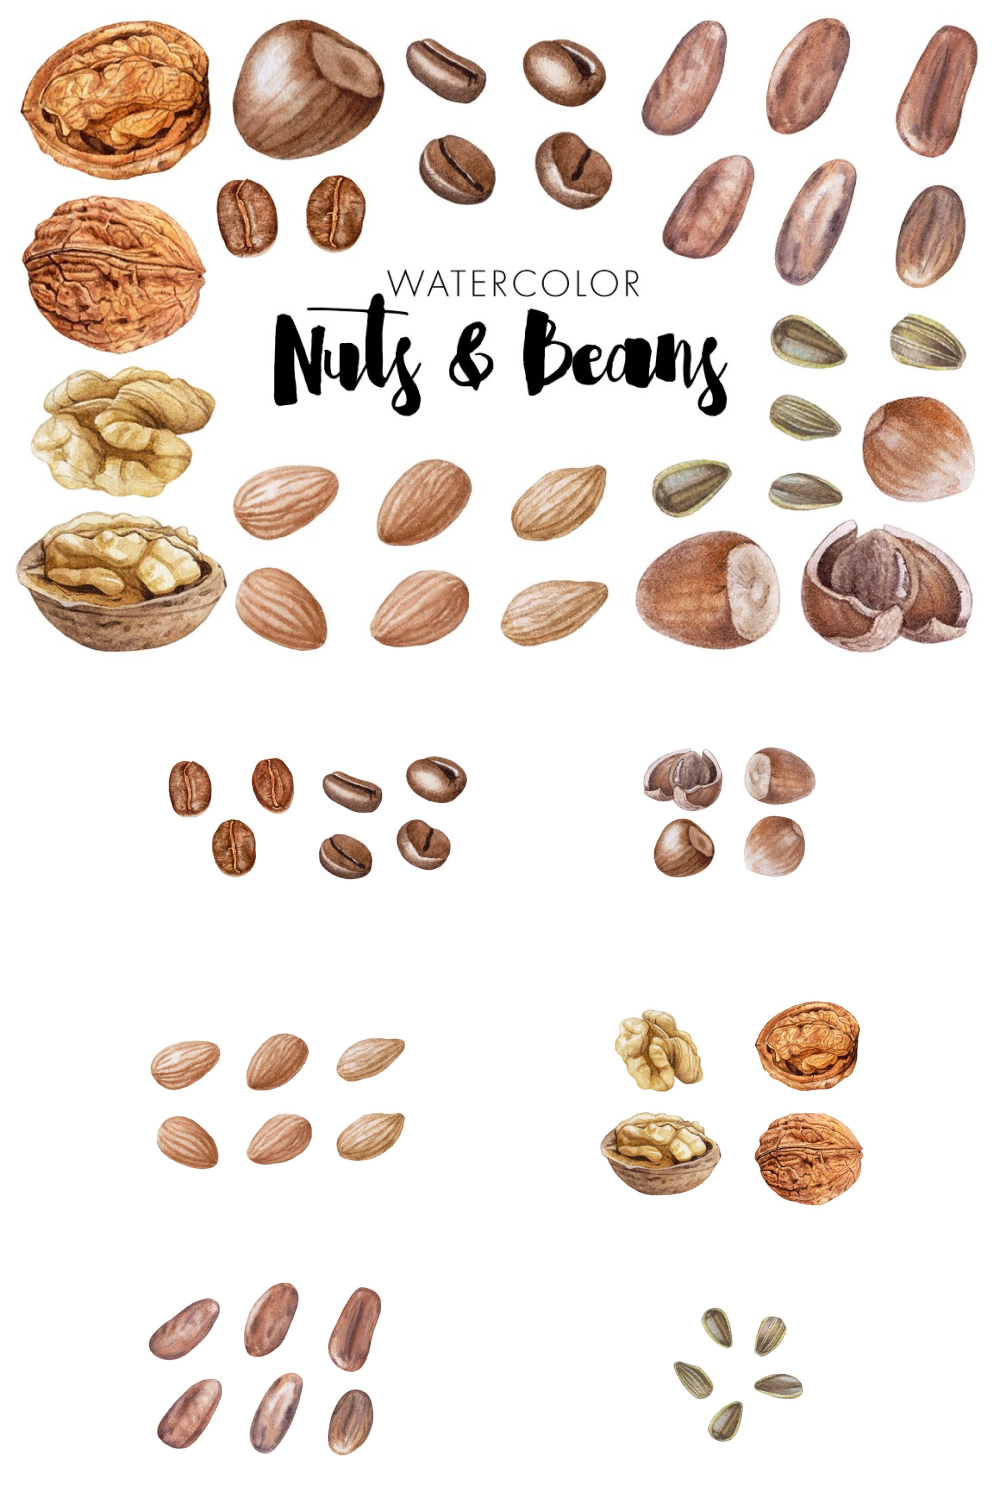 3 watercolor nuts beans1000x1500 161